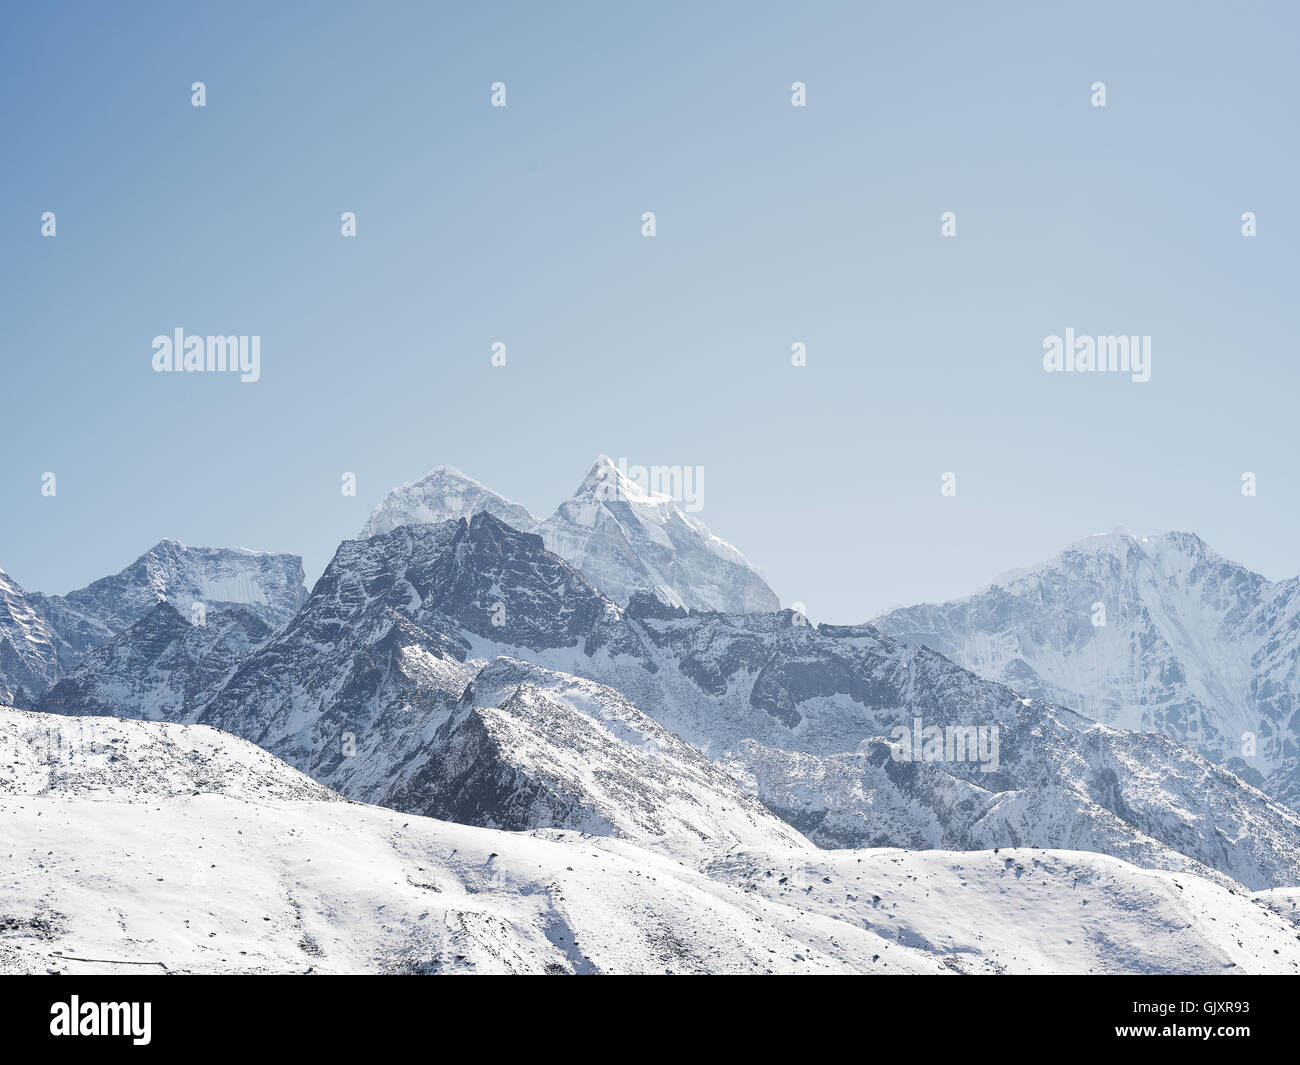 Snow capped jagged peaks of the Himalaya Mountains in Nepal's Everest Base Camp Stock Photo